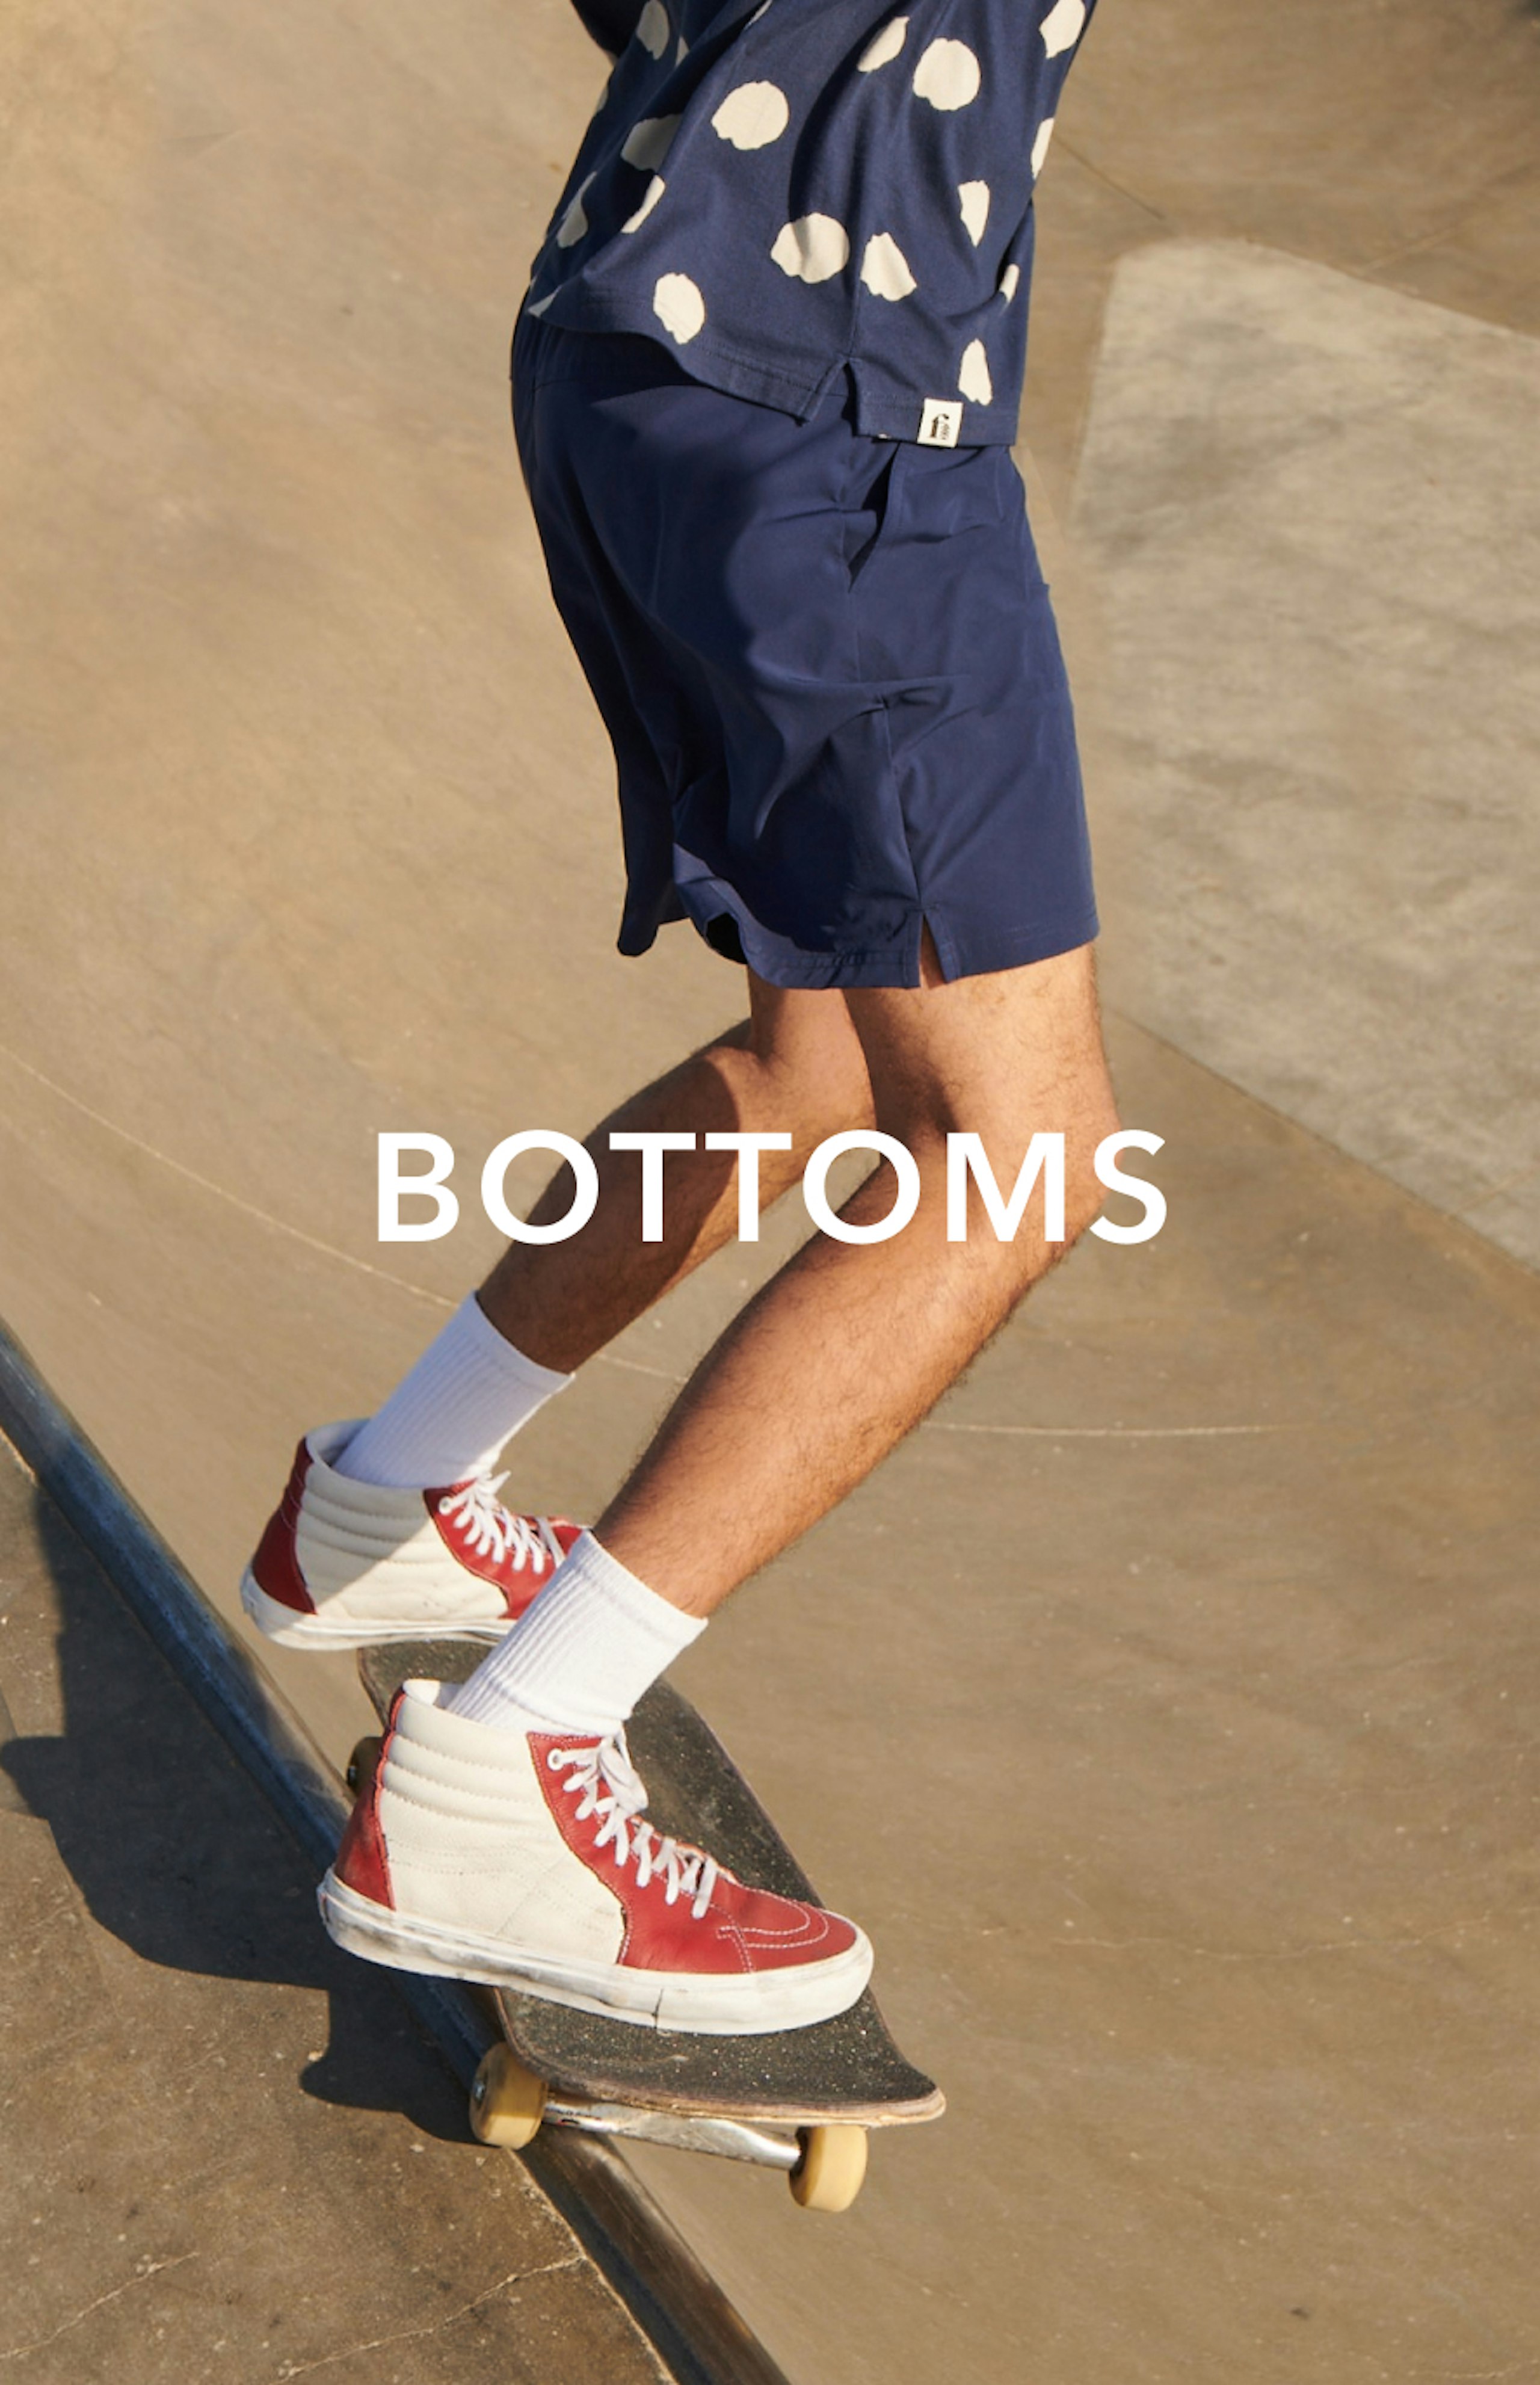 Person on skateboard Text reads "BOTTOMS"